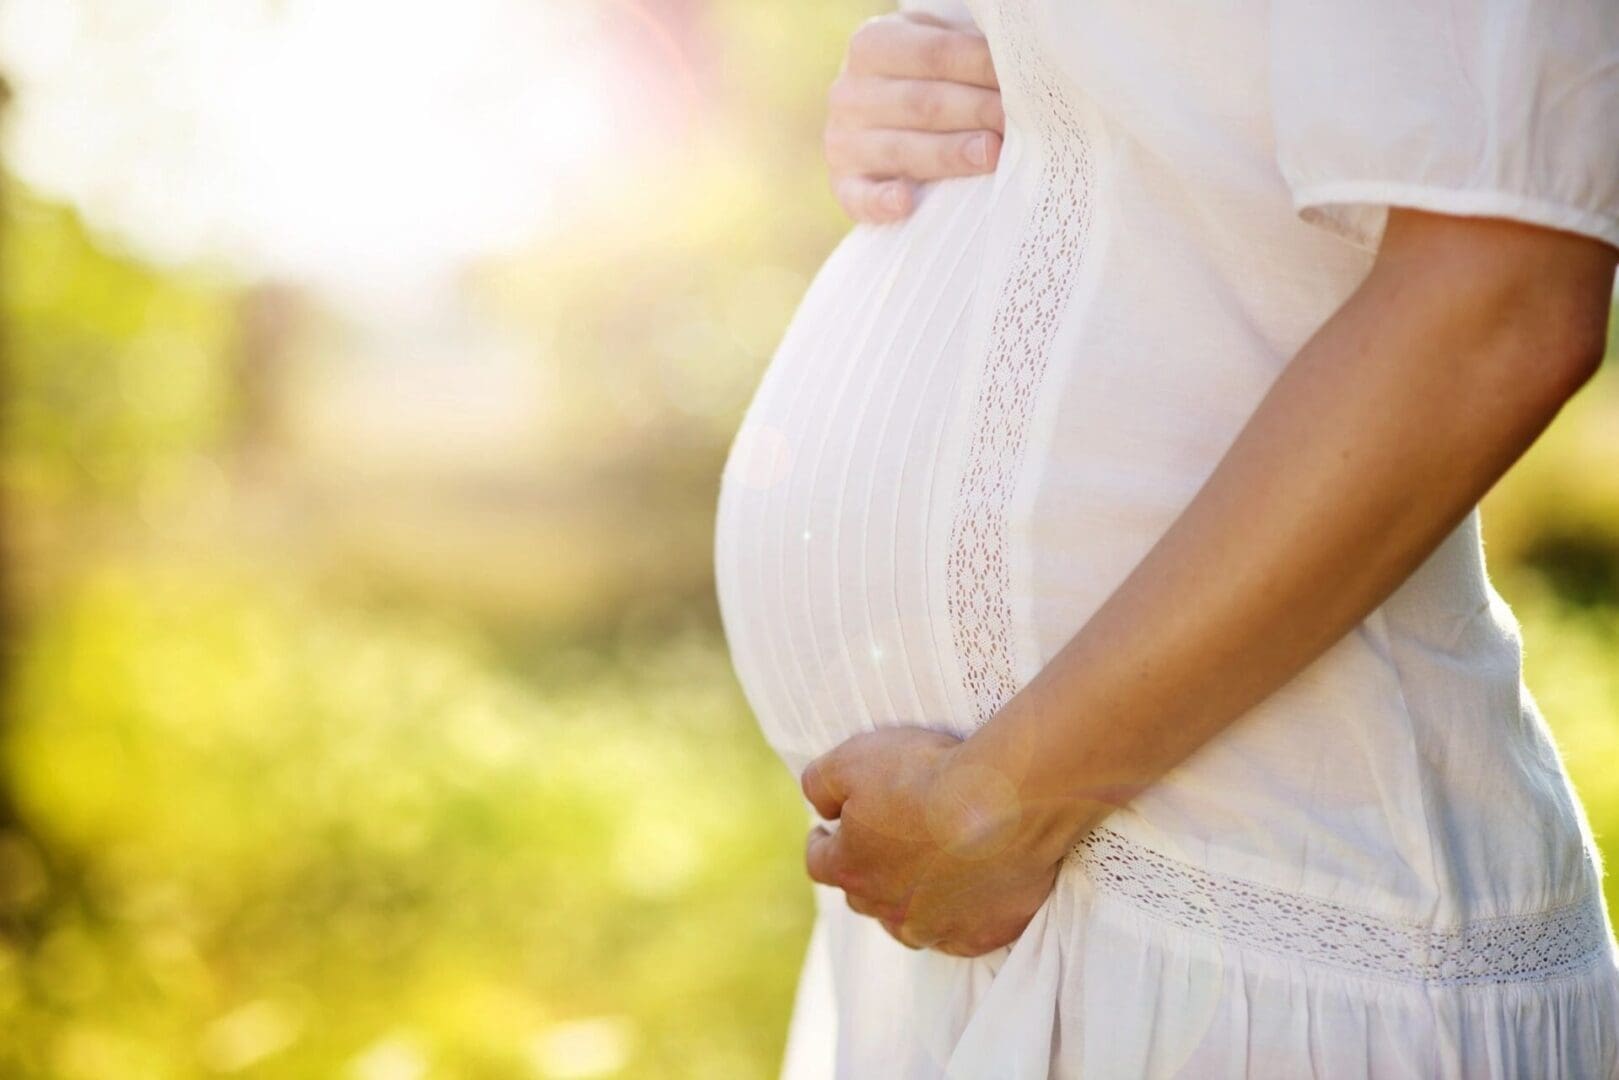 A pregnant woman standing outside in the sun.